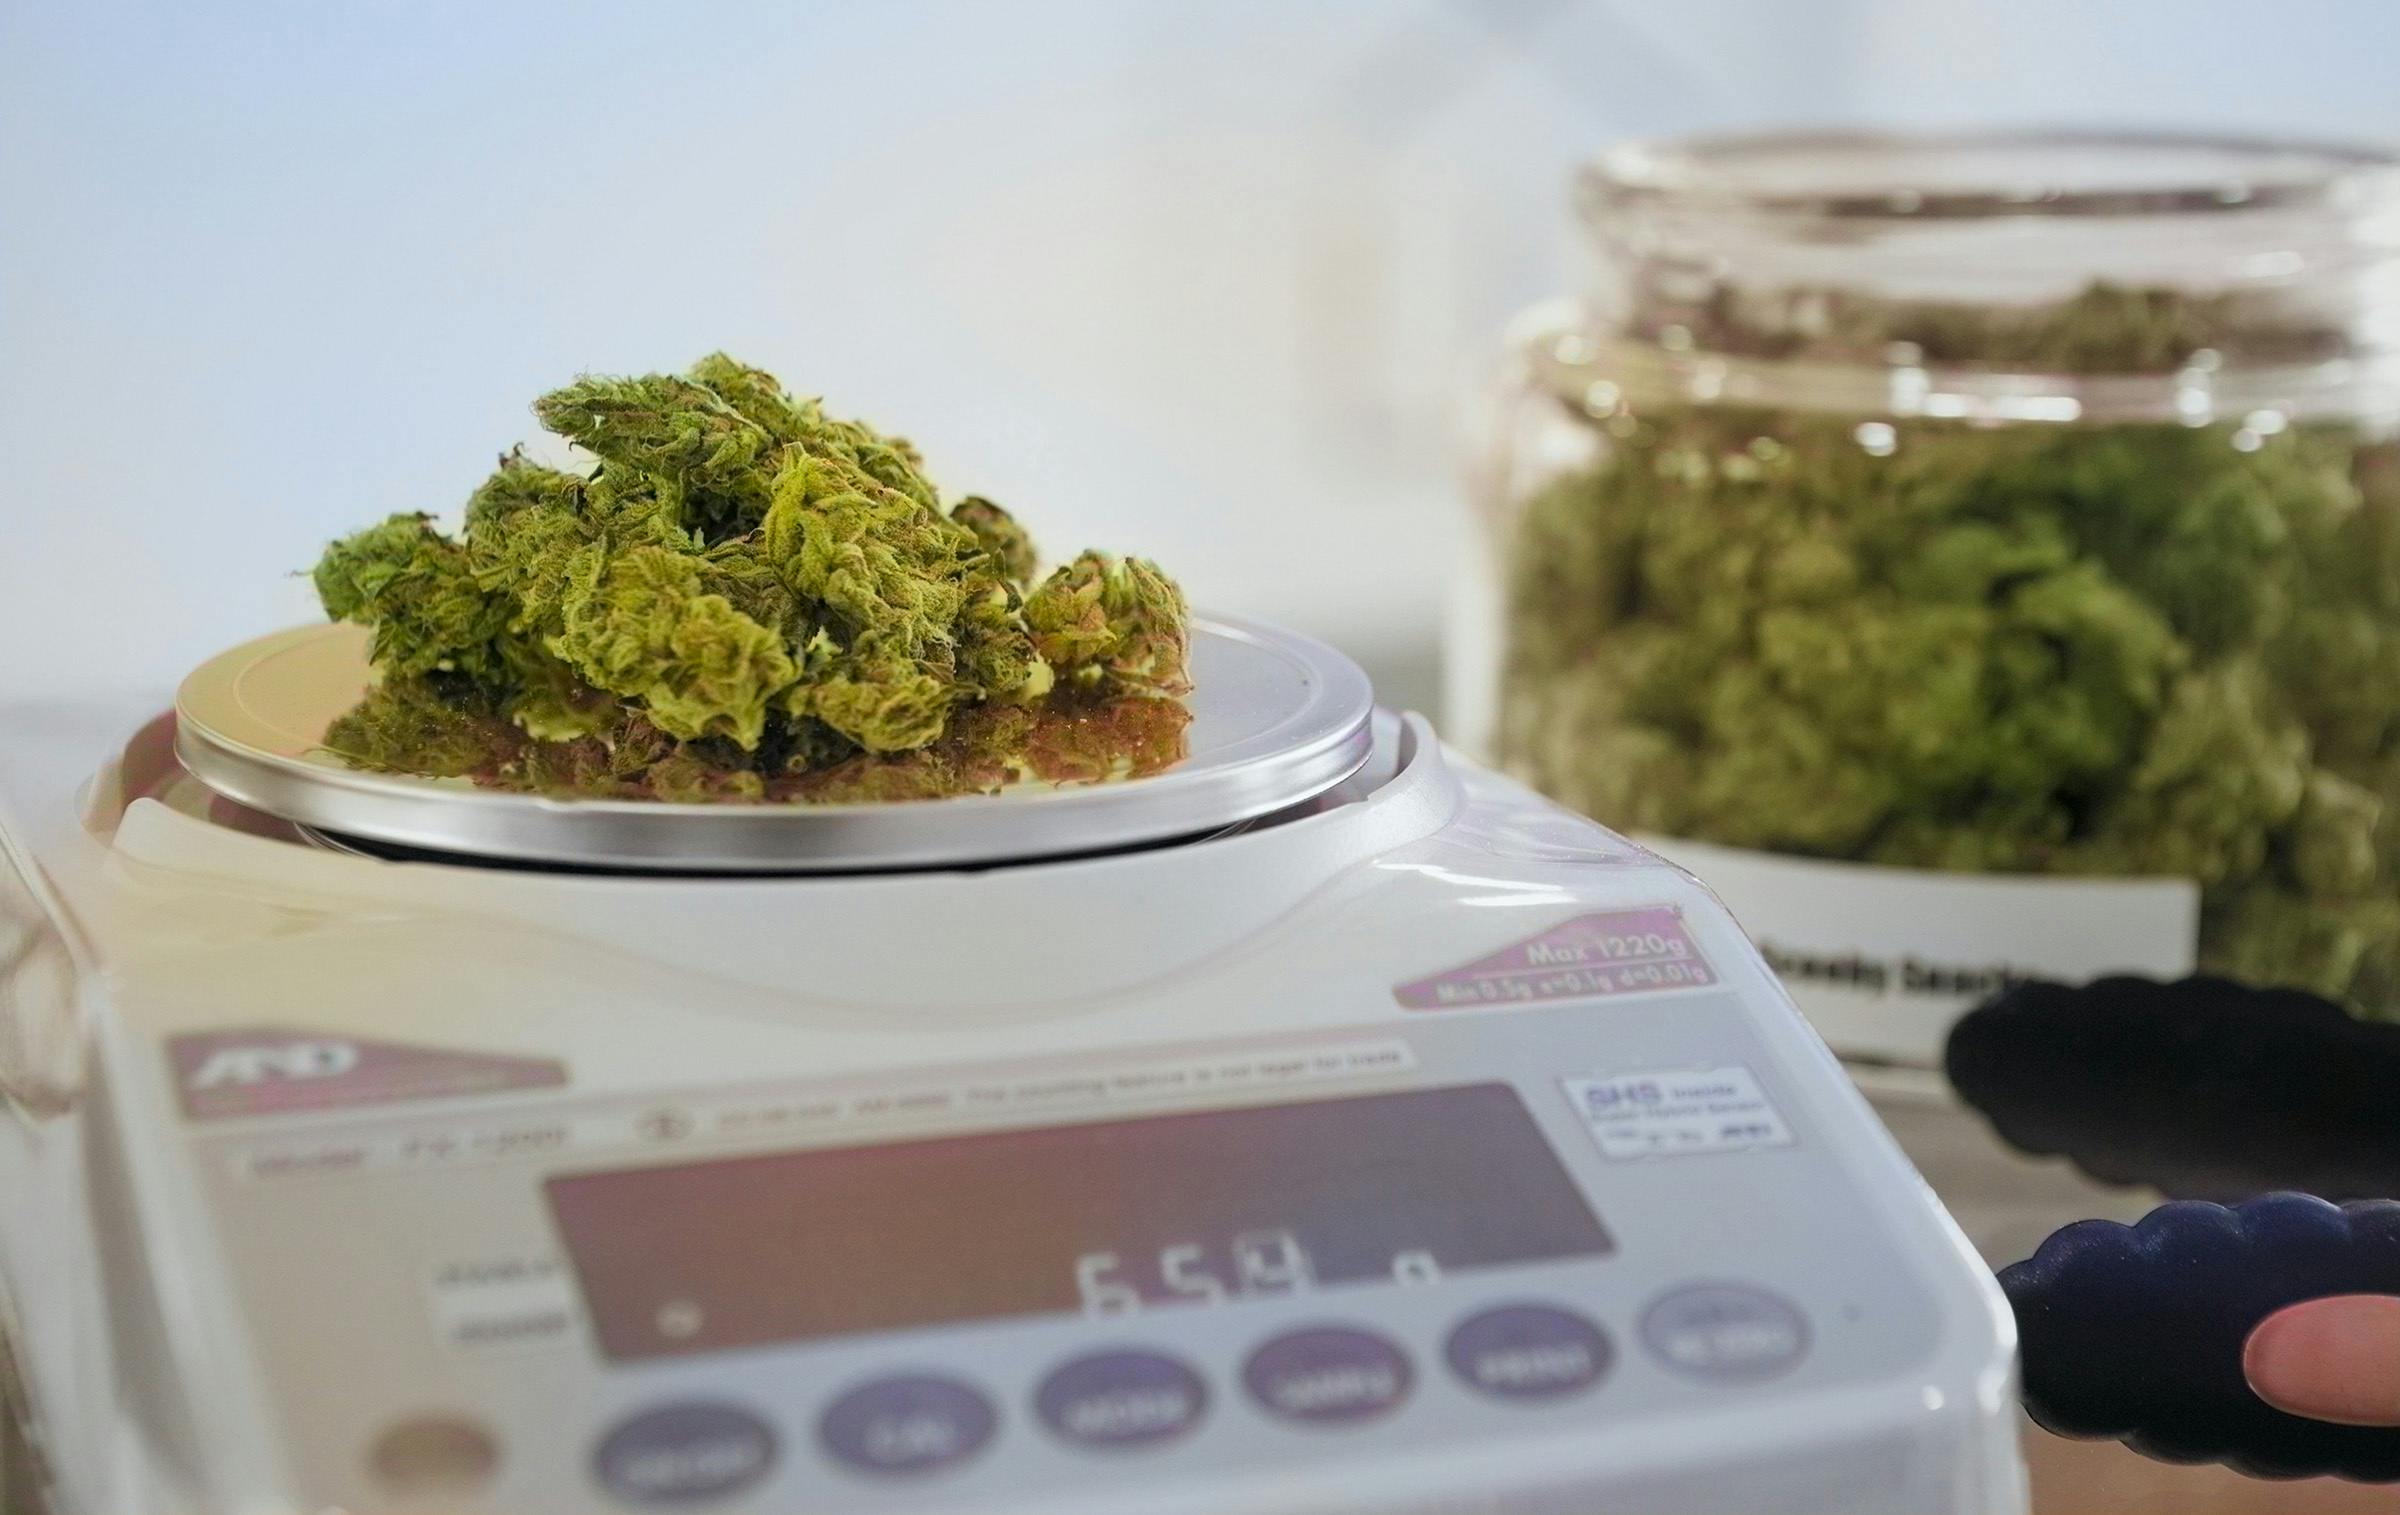 dried cannabis flower being weighed on a scale